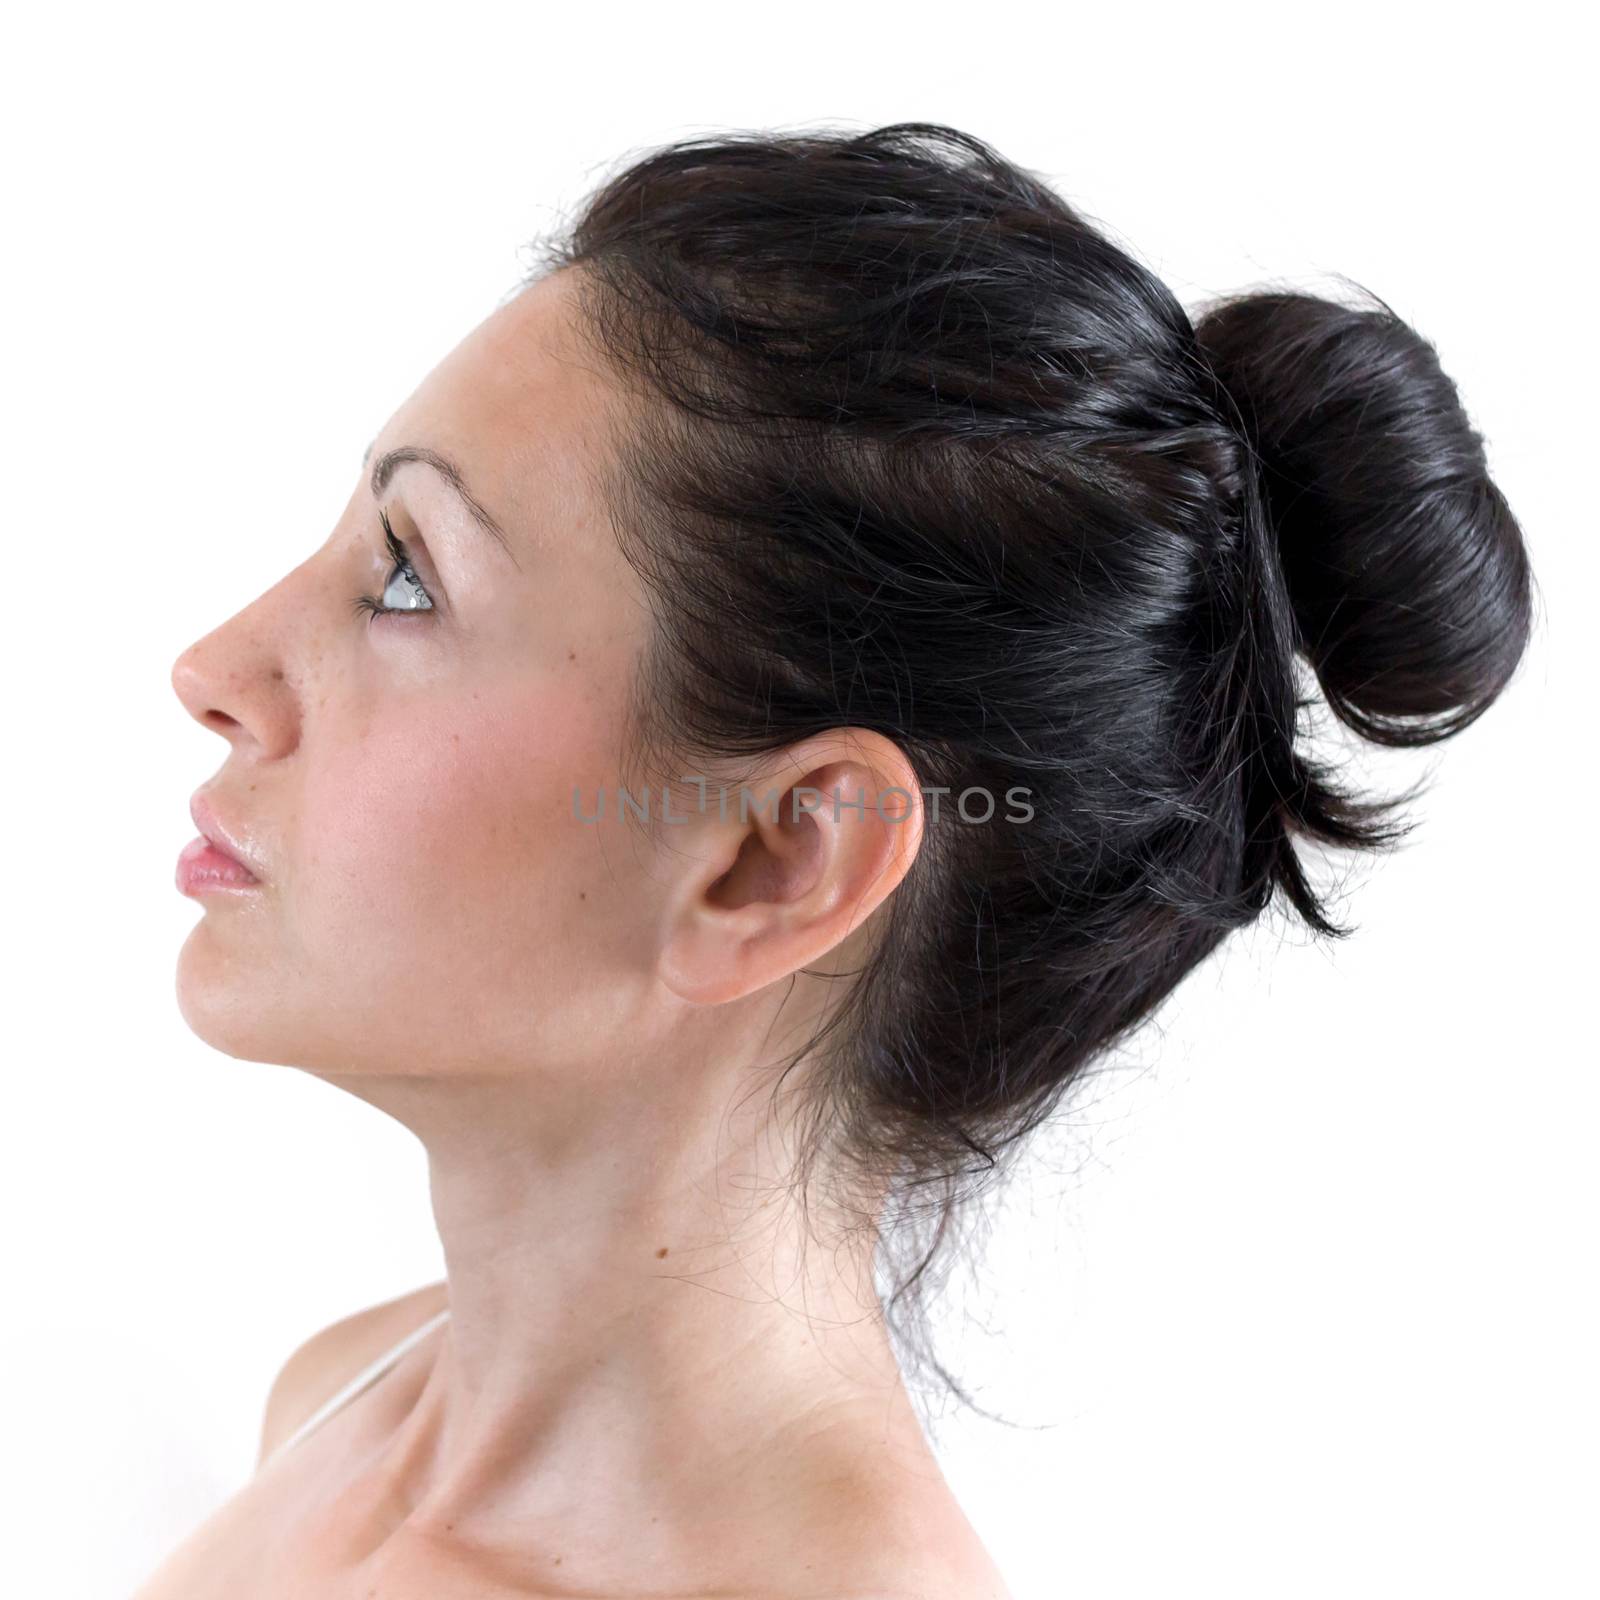 Profile of young woman's face with clean healthy skin.